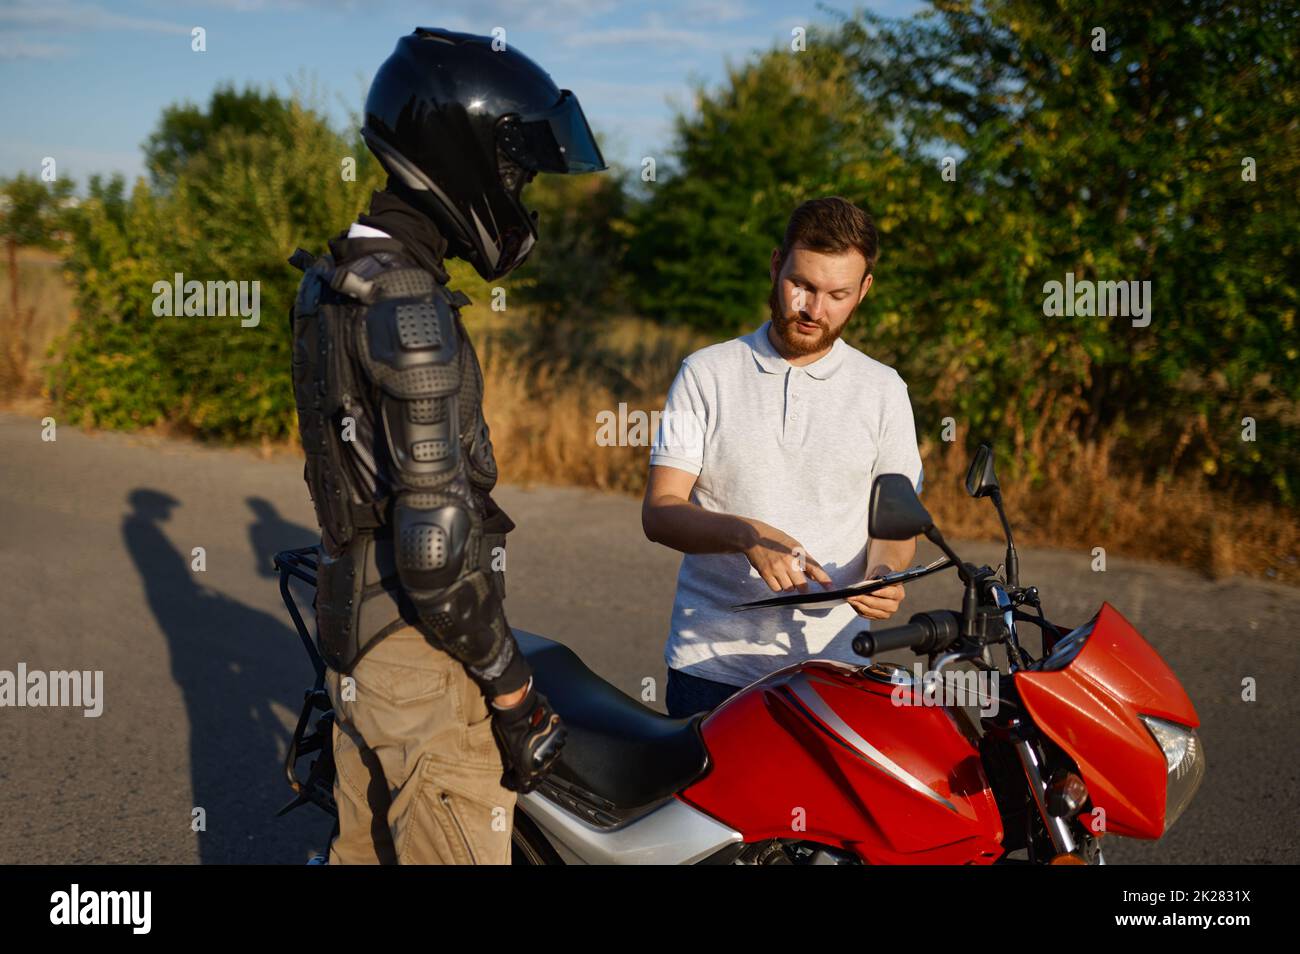 Driving lesson on motordrome, motorcycle school Stock Photo